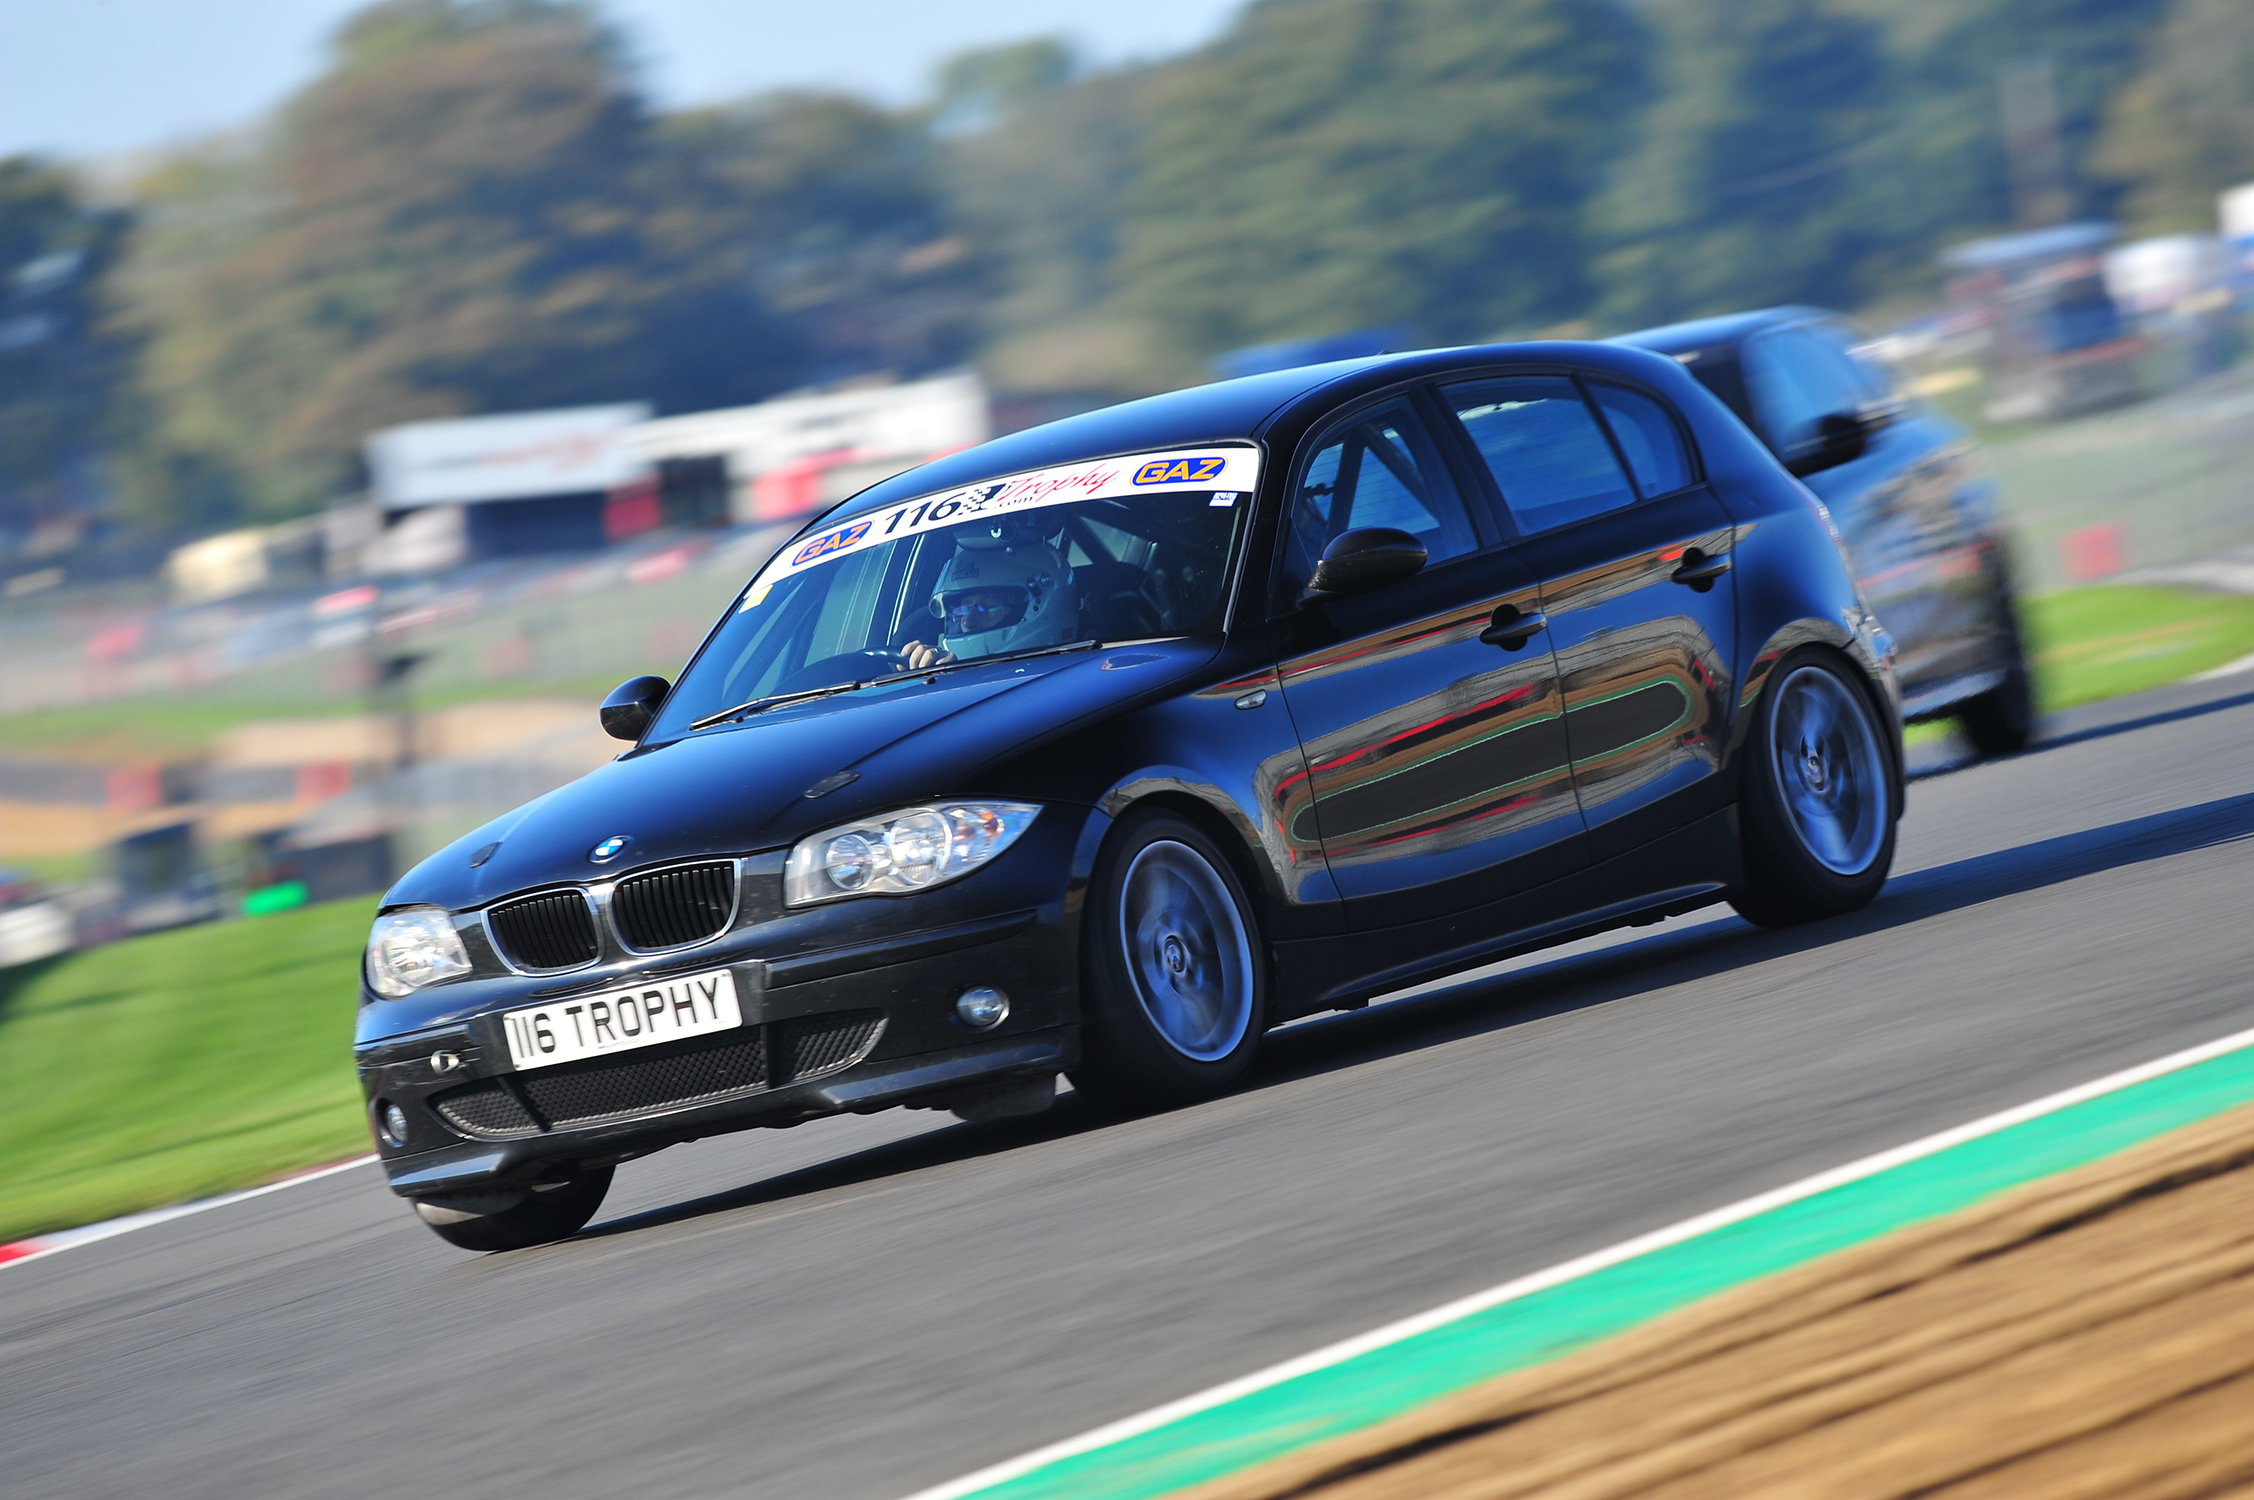 Klarius provided regulatory mandated systems for the BMW Compact Cup